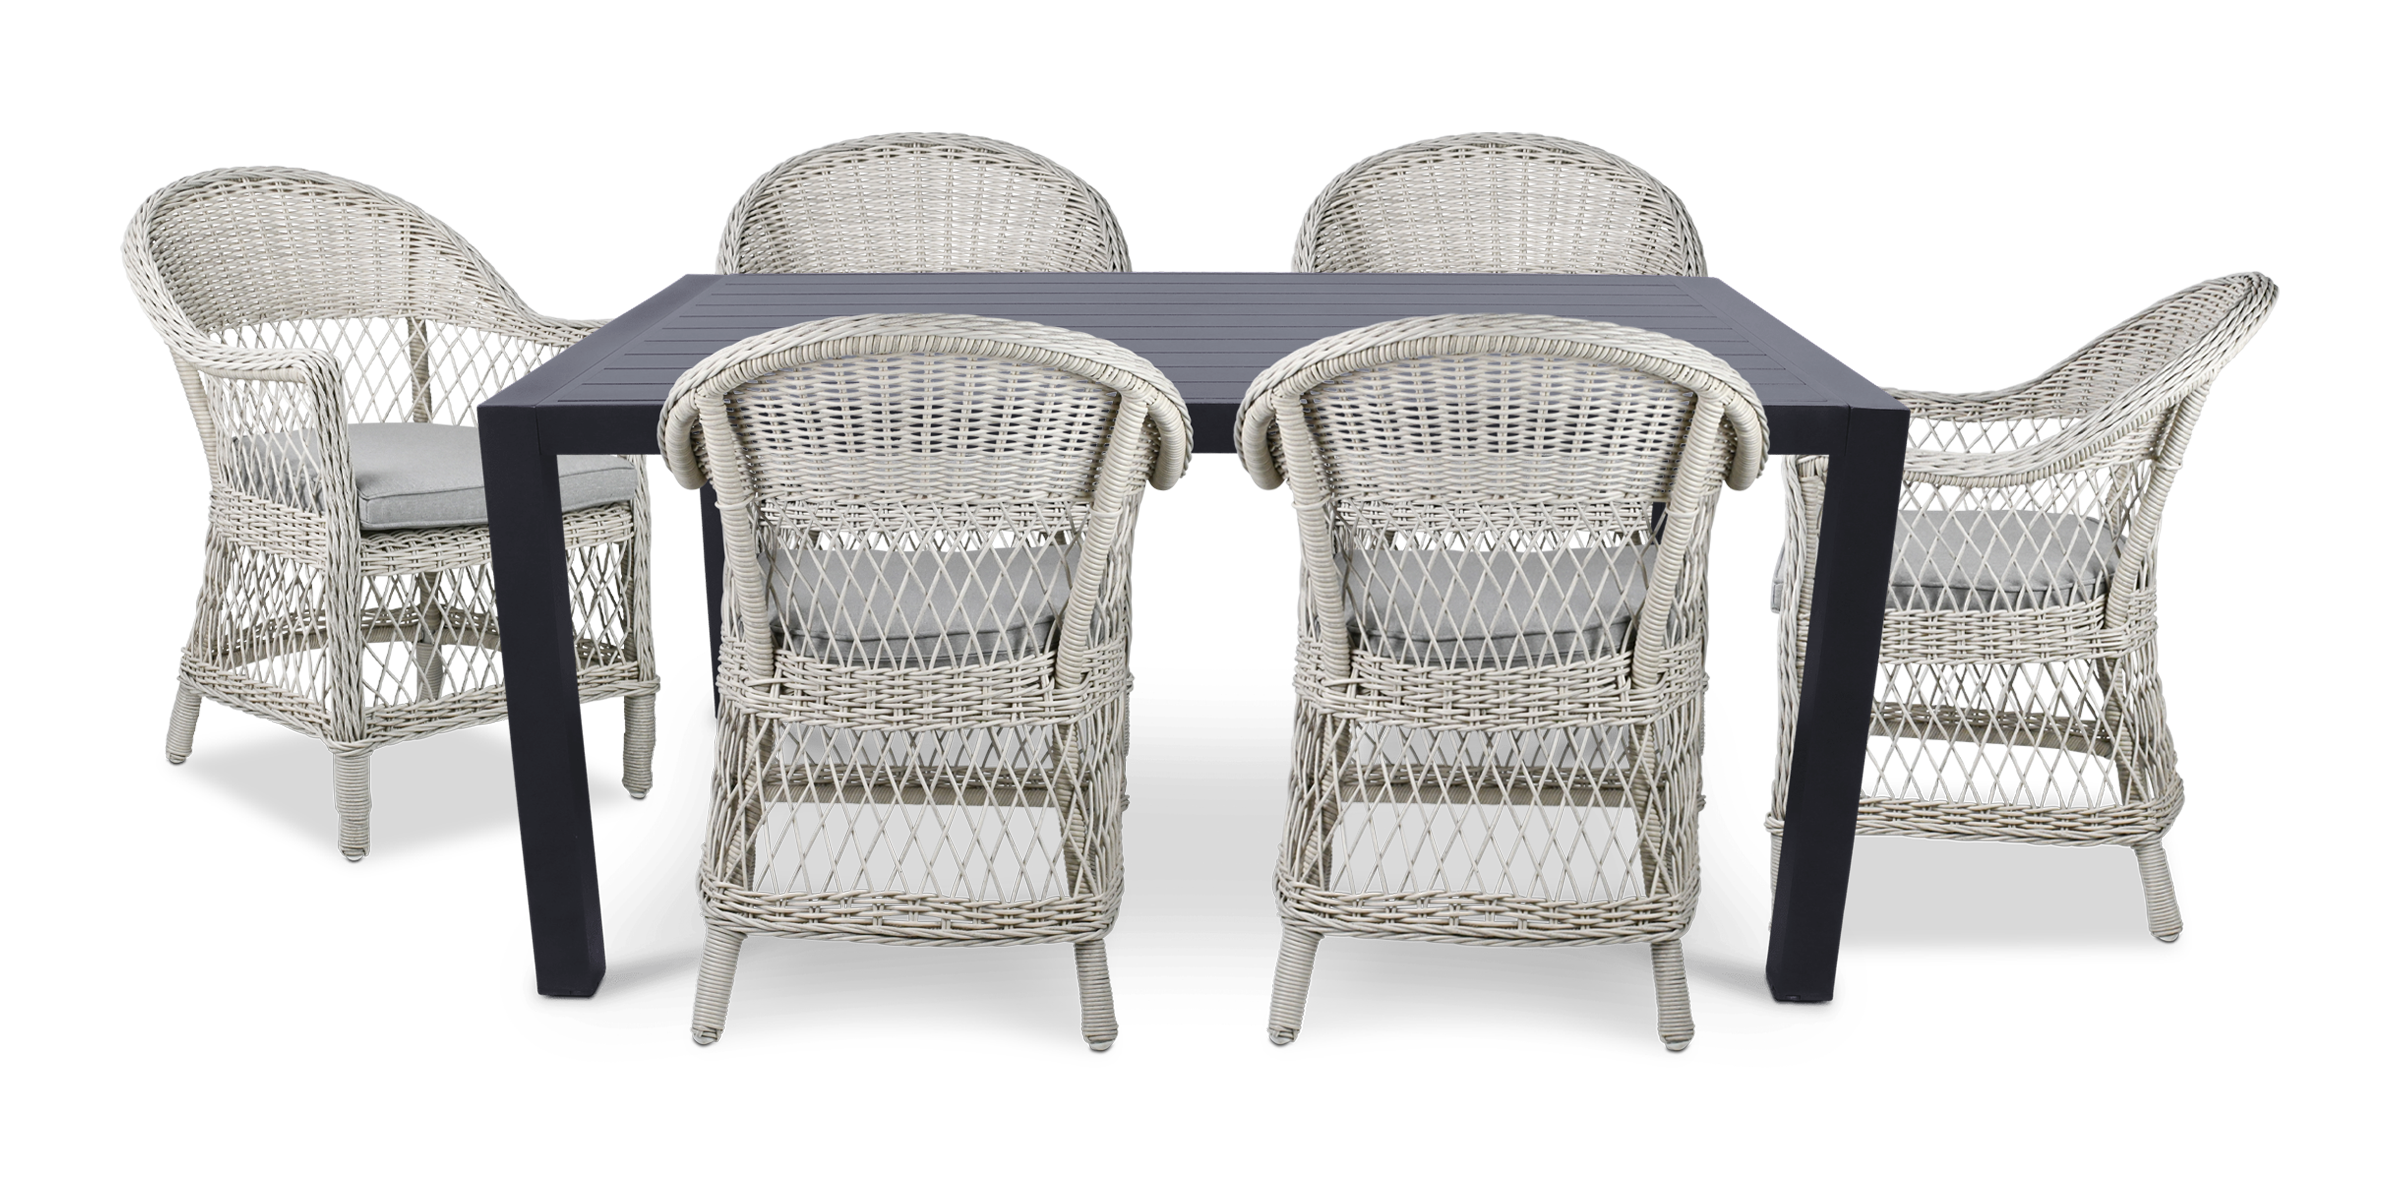 Bahamas Rectangle 7 Piece Outdoor Setting in Gunmetal with Wicker Chairs